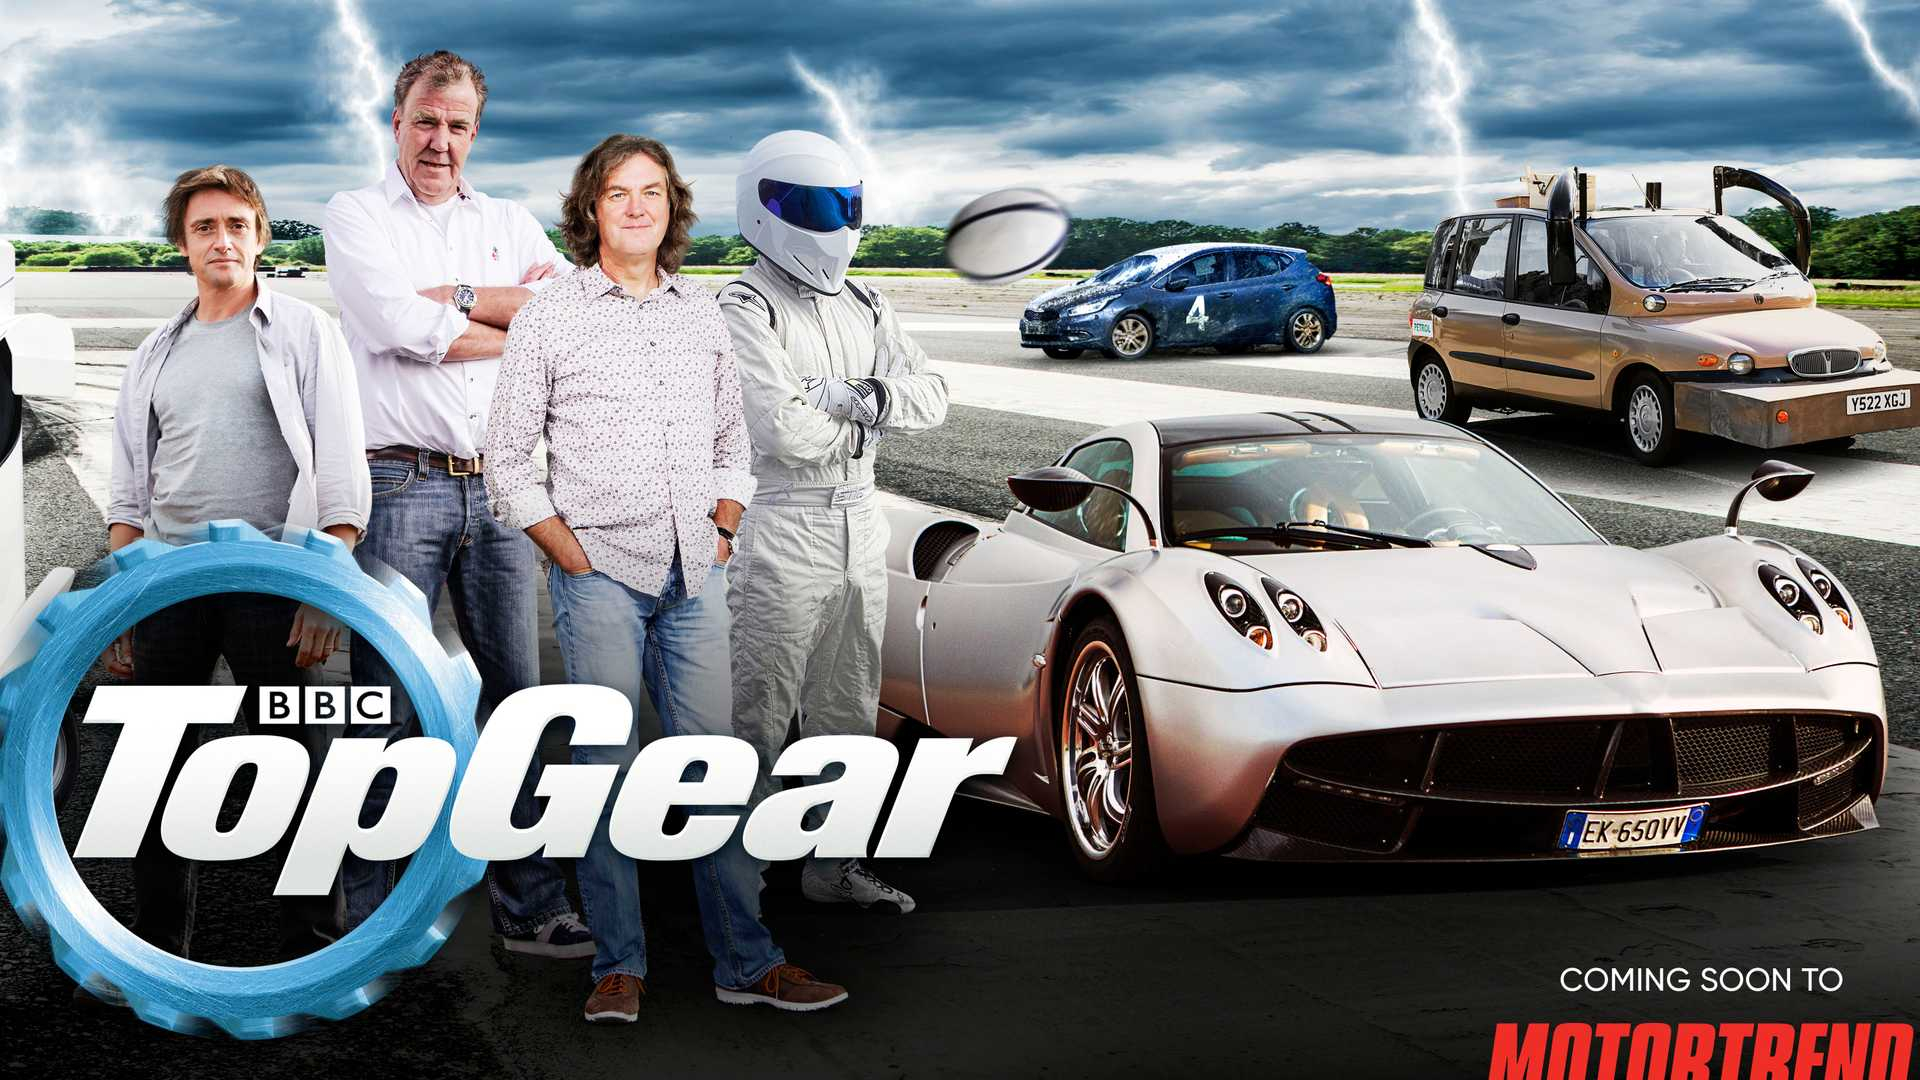 1920x1080 MotorTrend Strikes Deal To Produce New Top Gear America With BBC